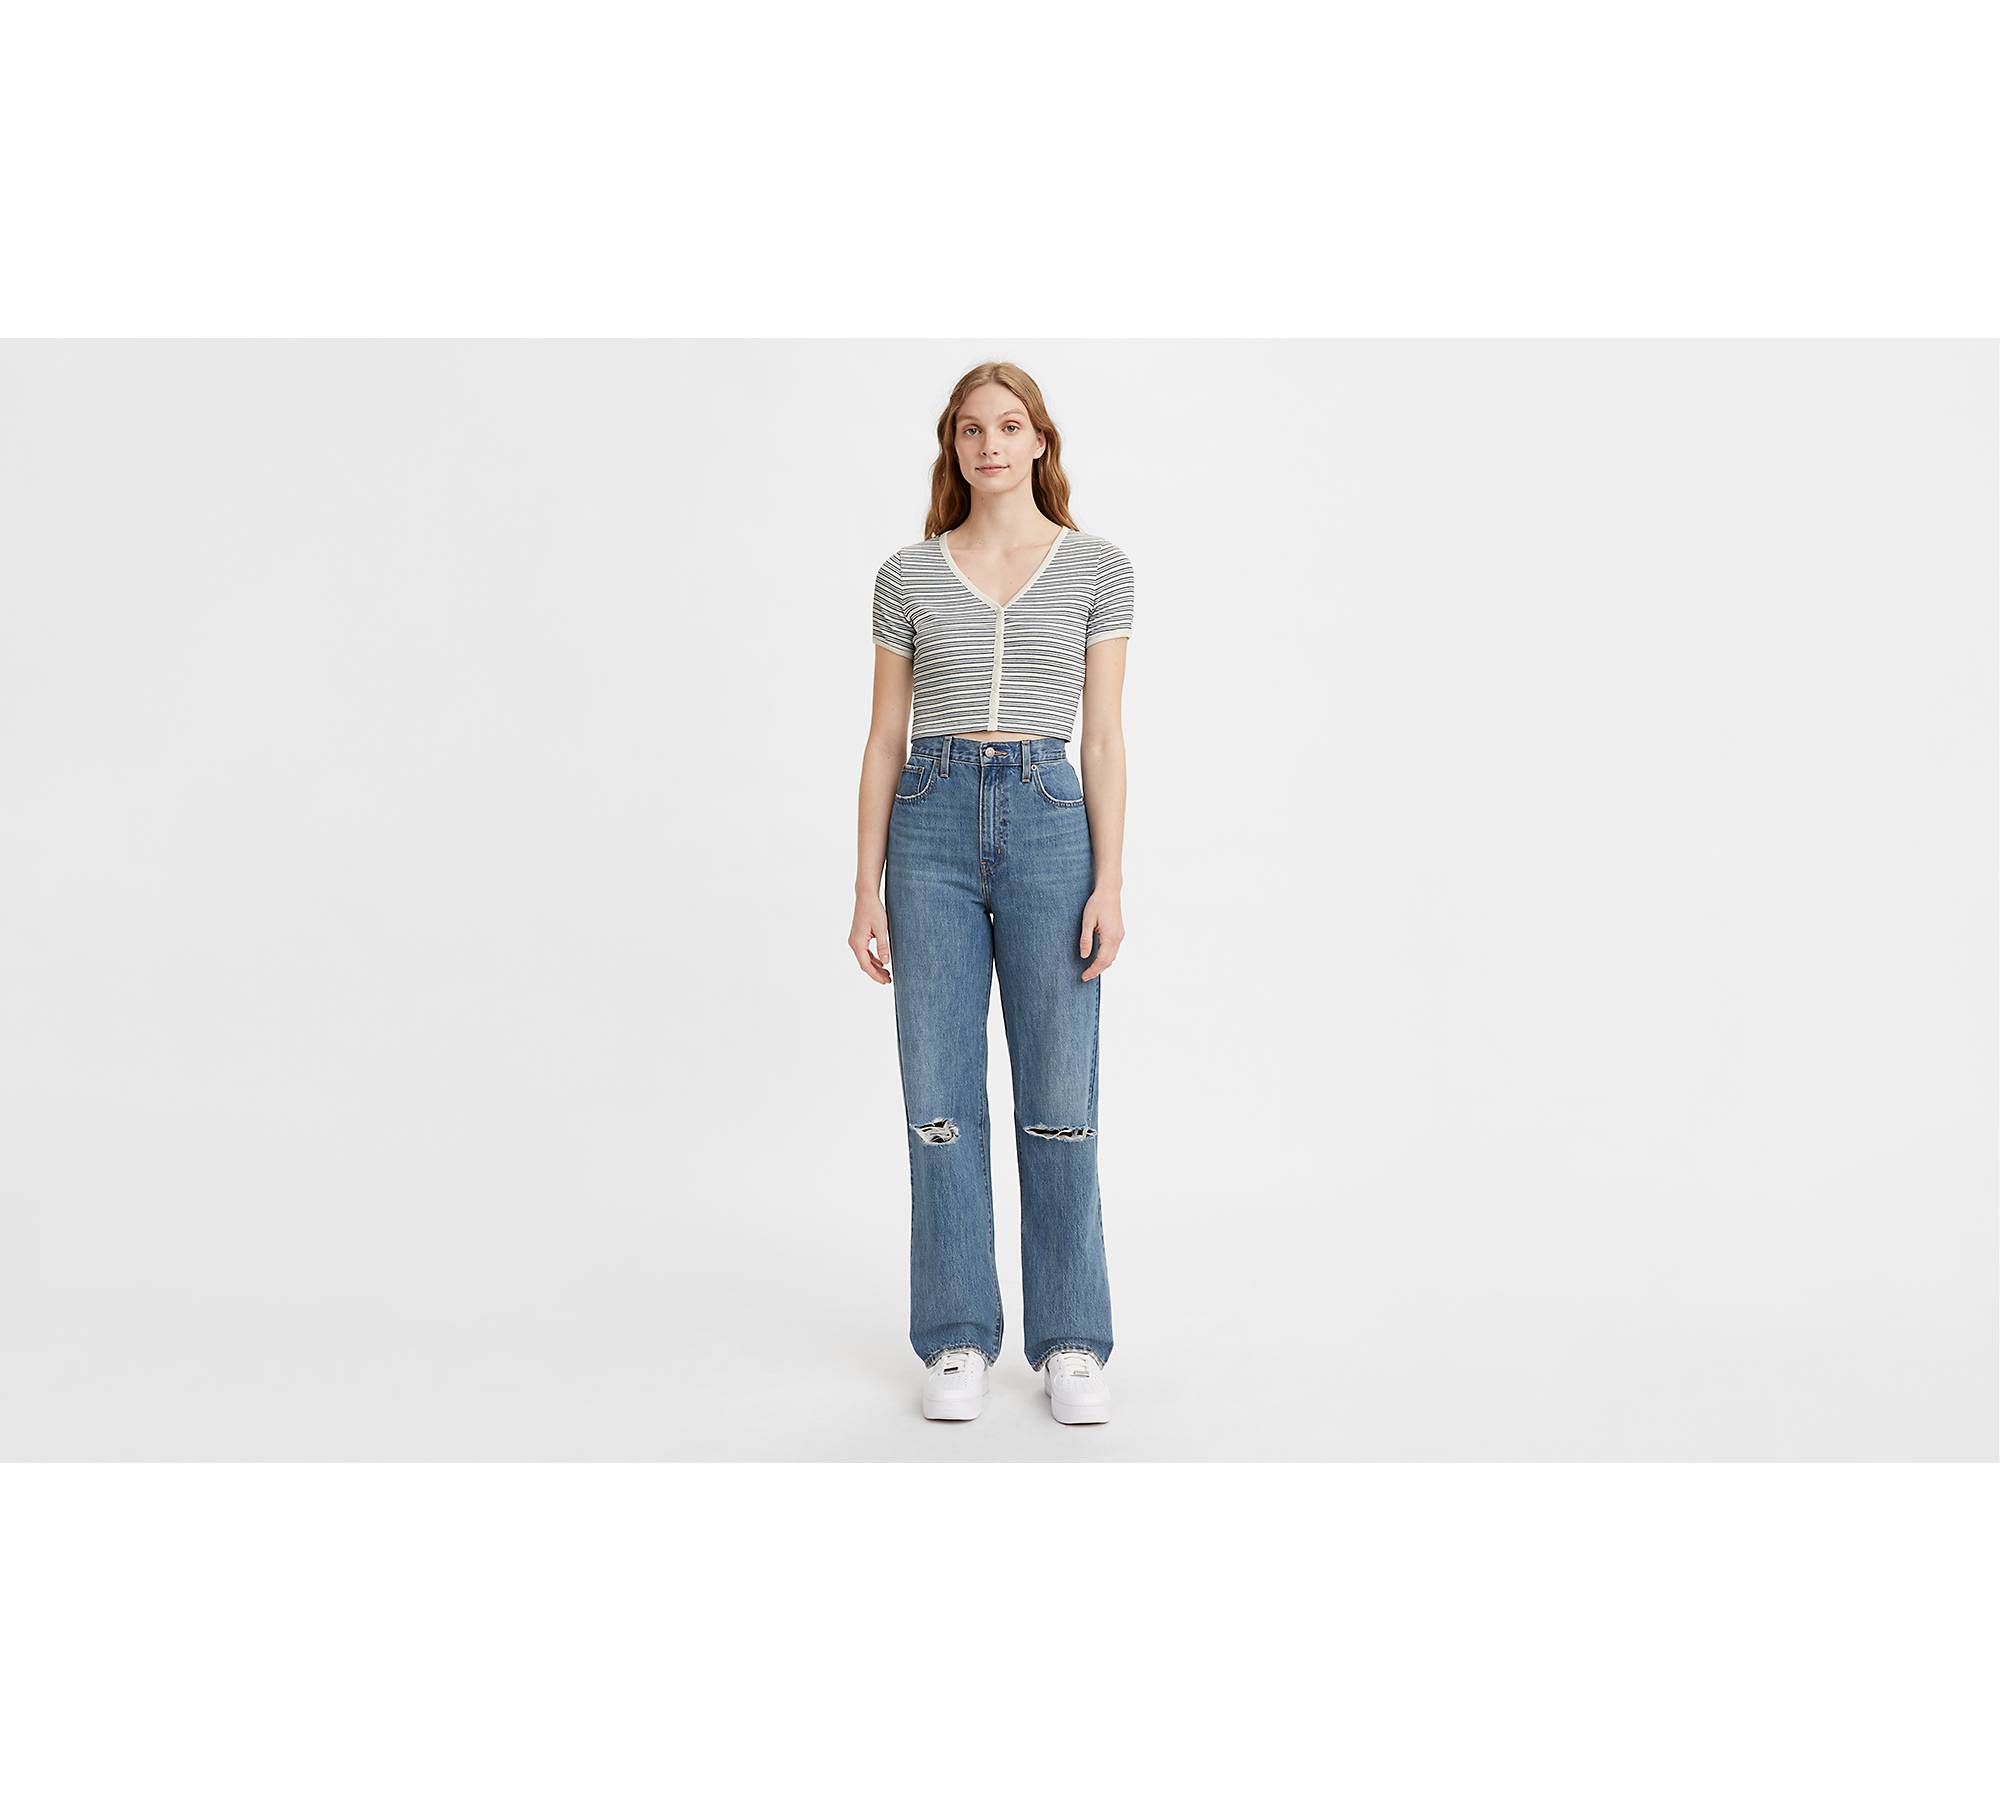 Levi's Women's High Waisted Taper Jeans, Don't at me, 29 (US 8) 